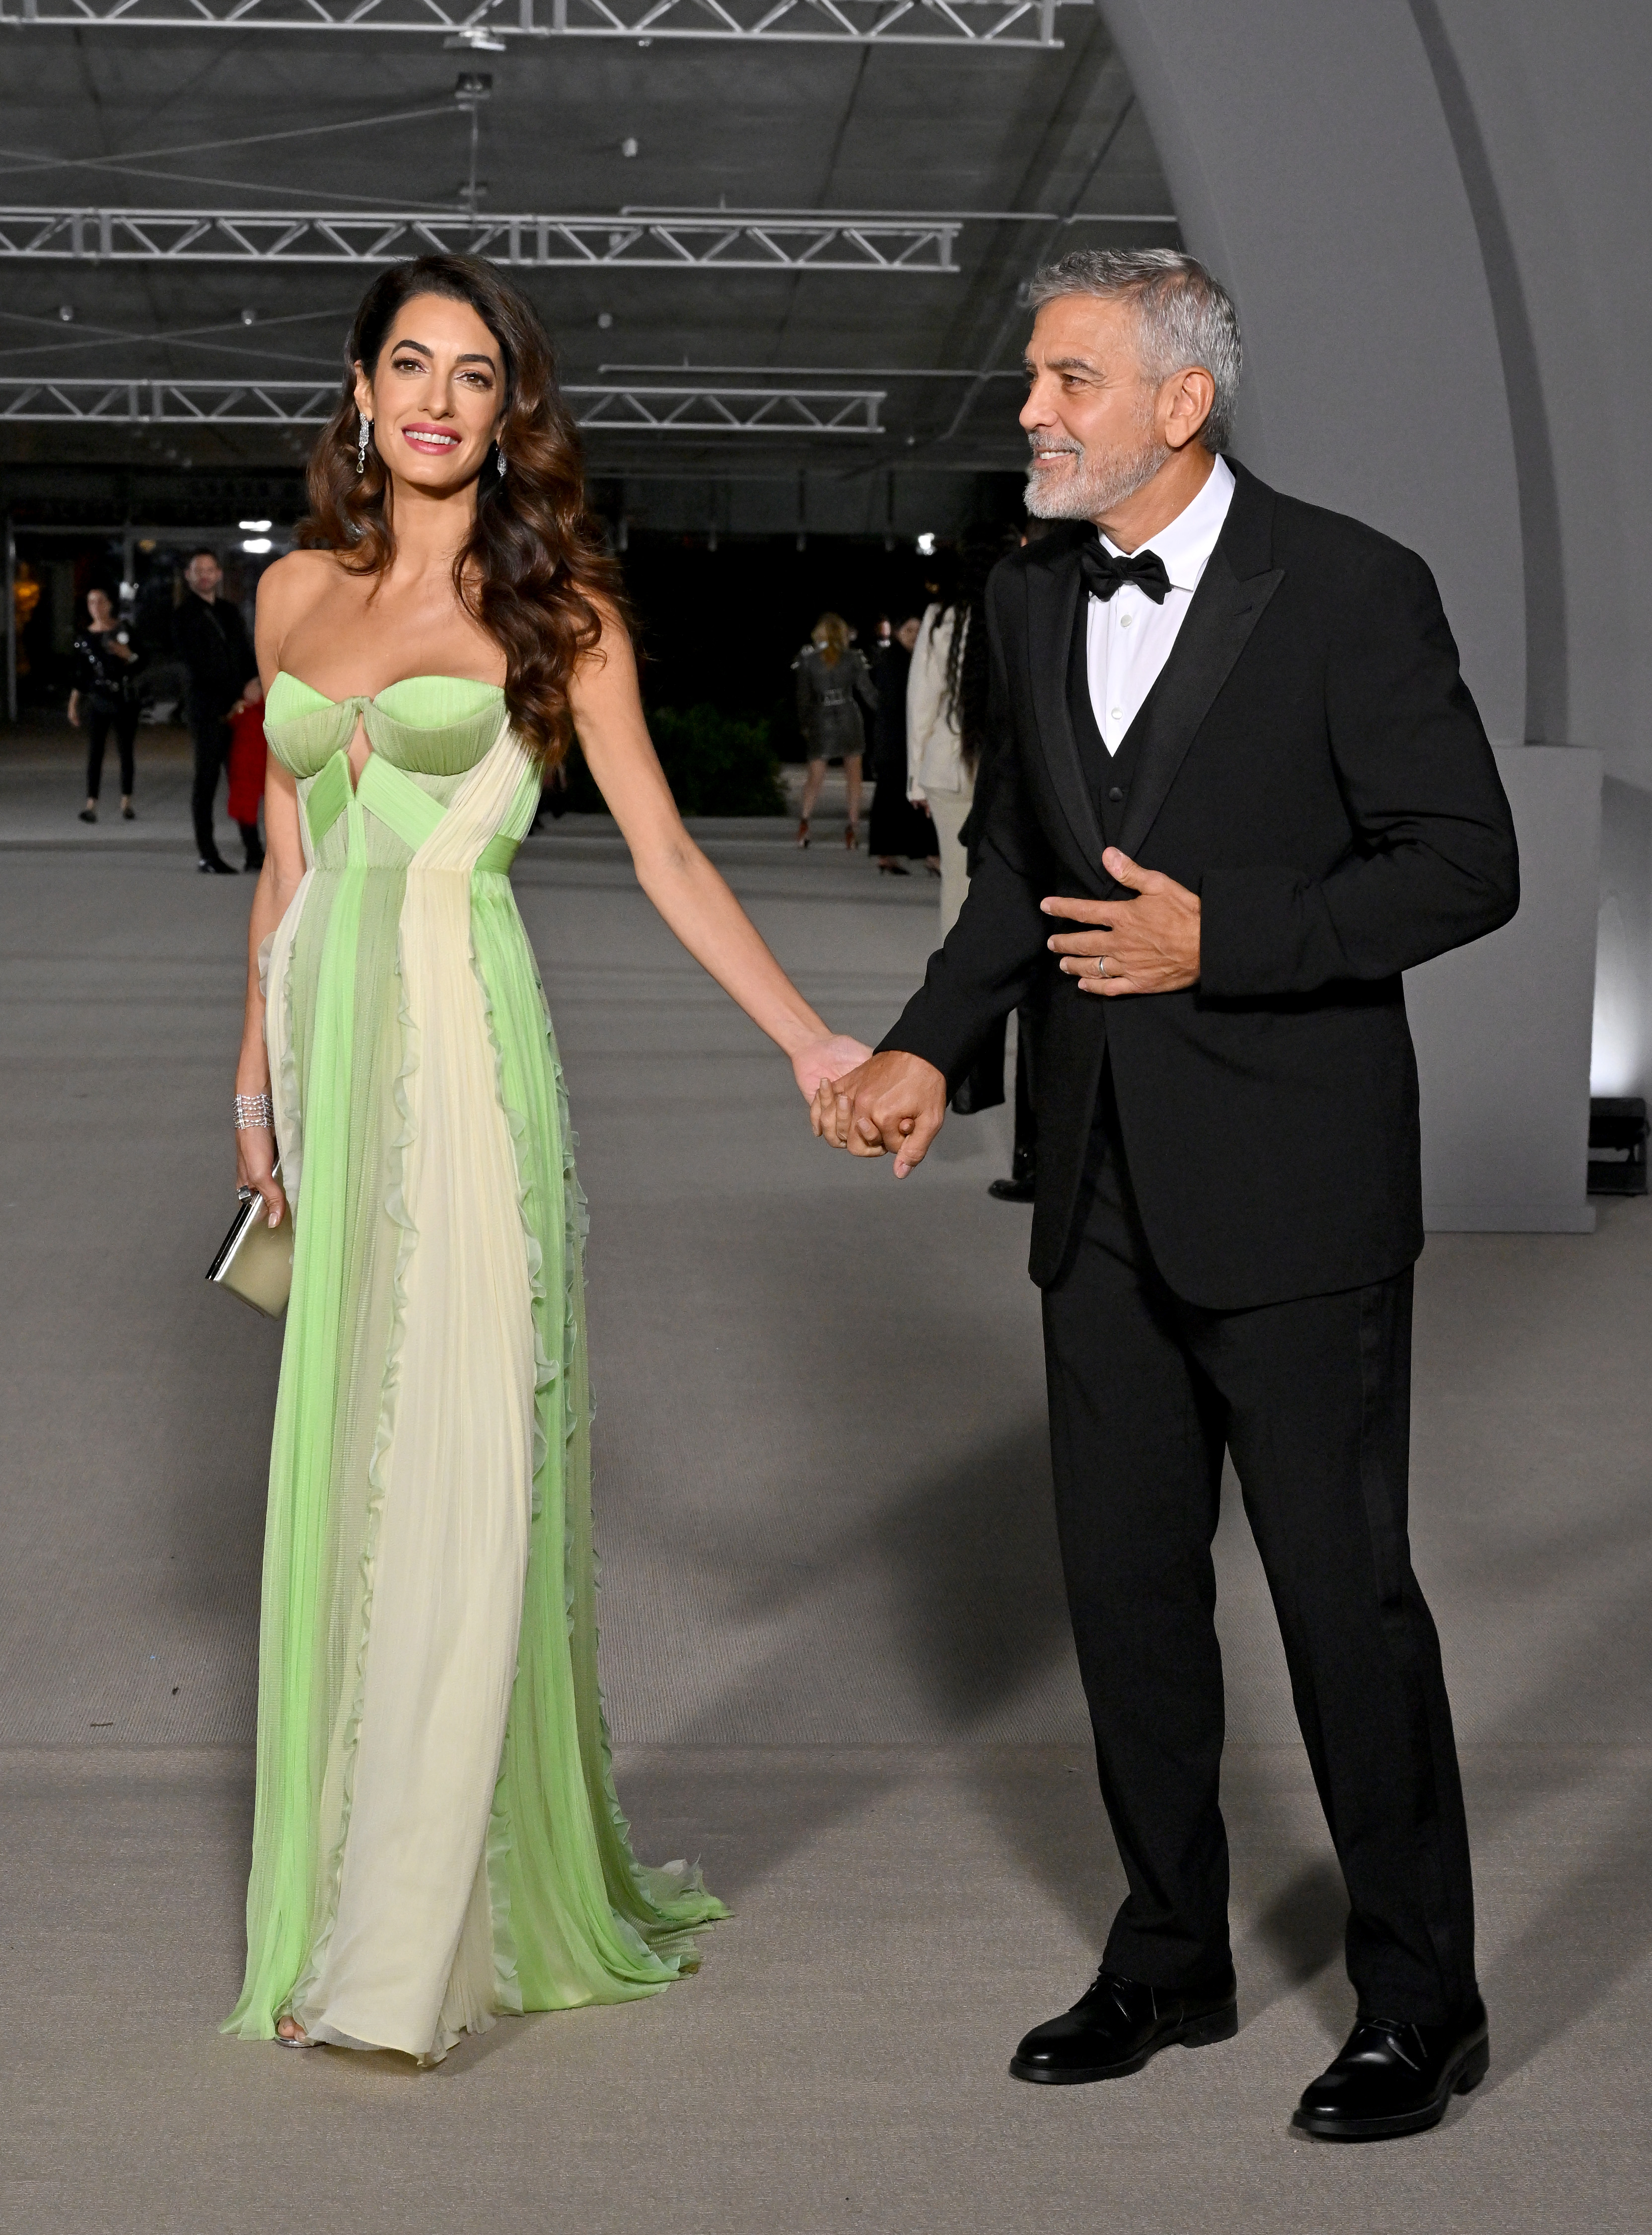 Amal and George Clooney at the 2nd Annual Academy Museum Gala in Los Angeles, California on October 15, 2022 | Source: Getty Images